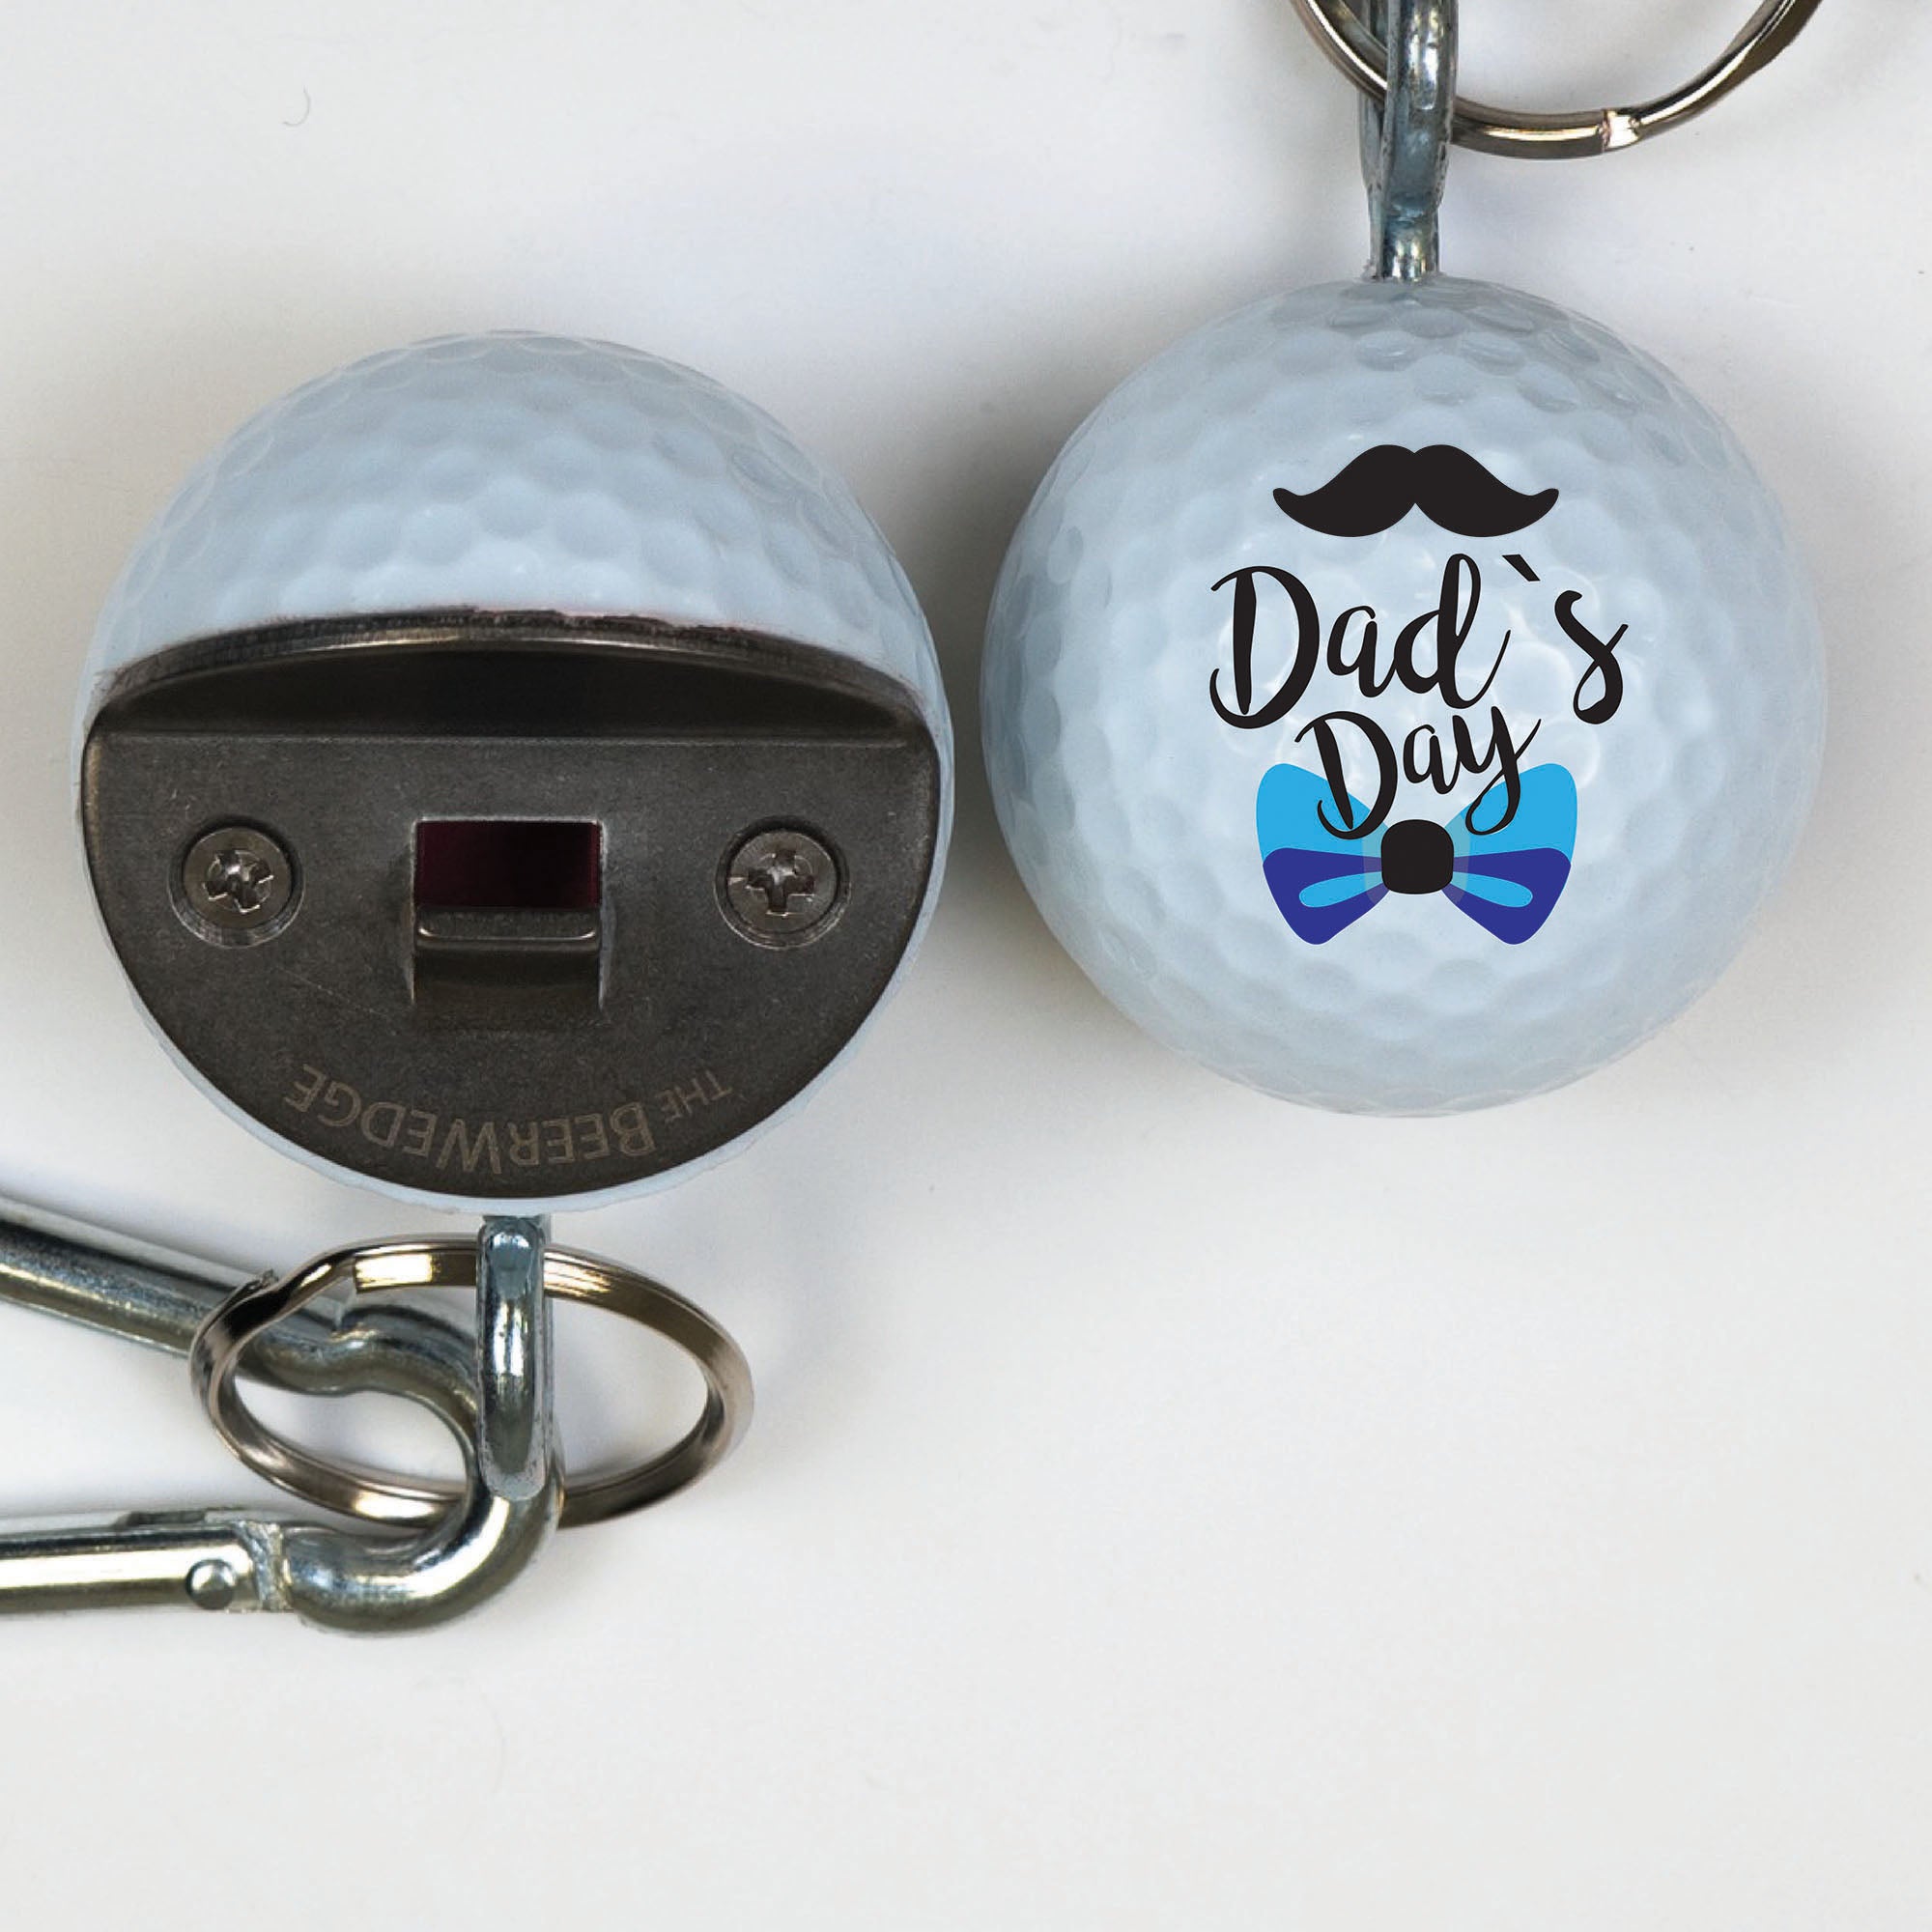 Golf Bottle Opener with Dad's Day Design